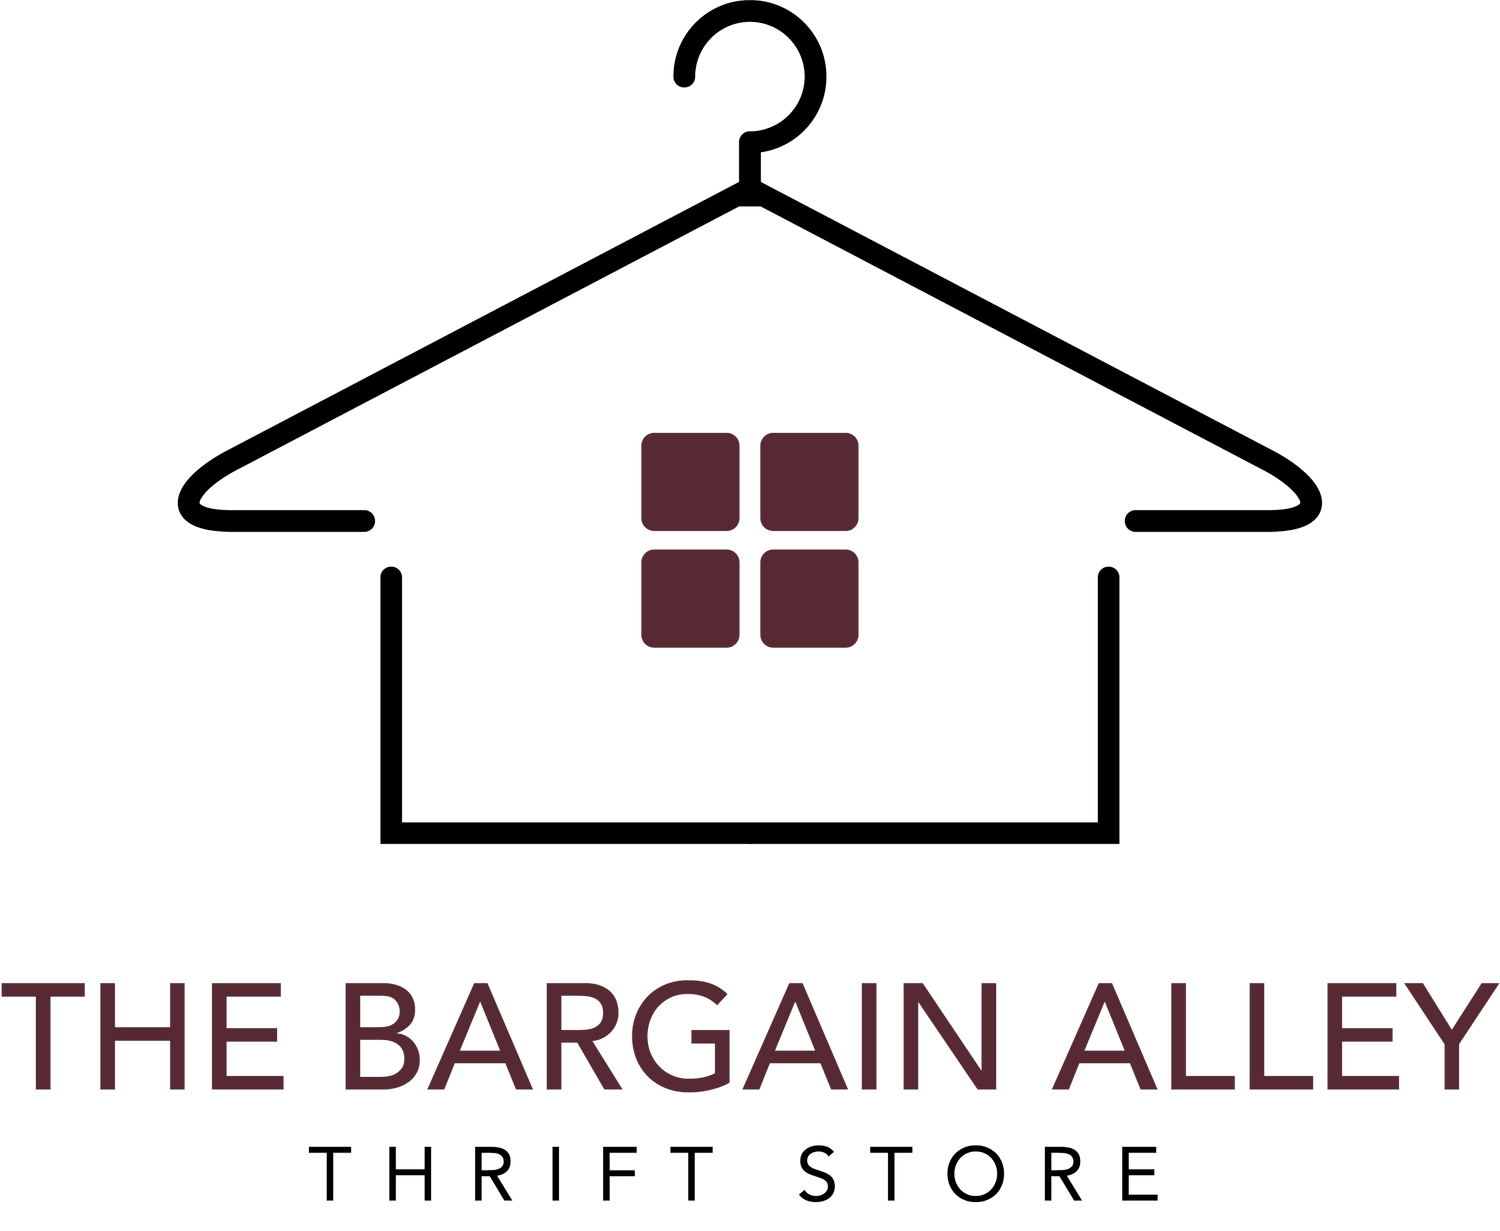 The Bargain Alley